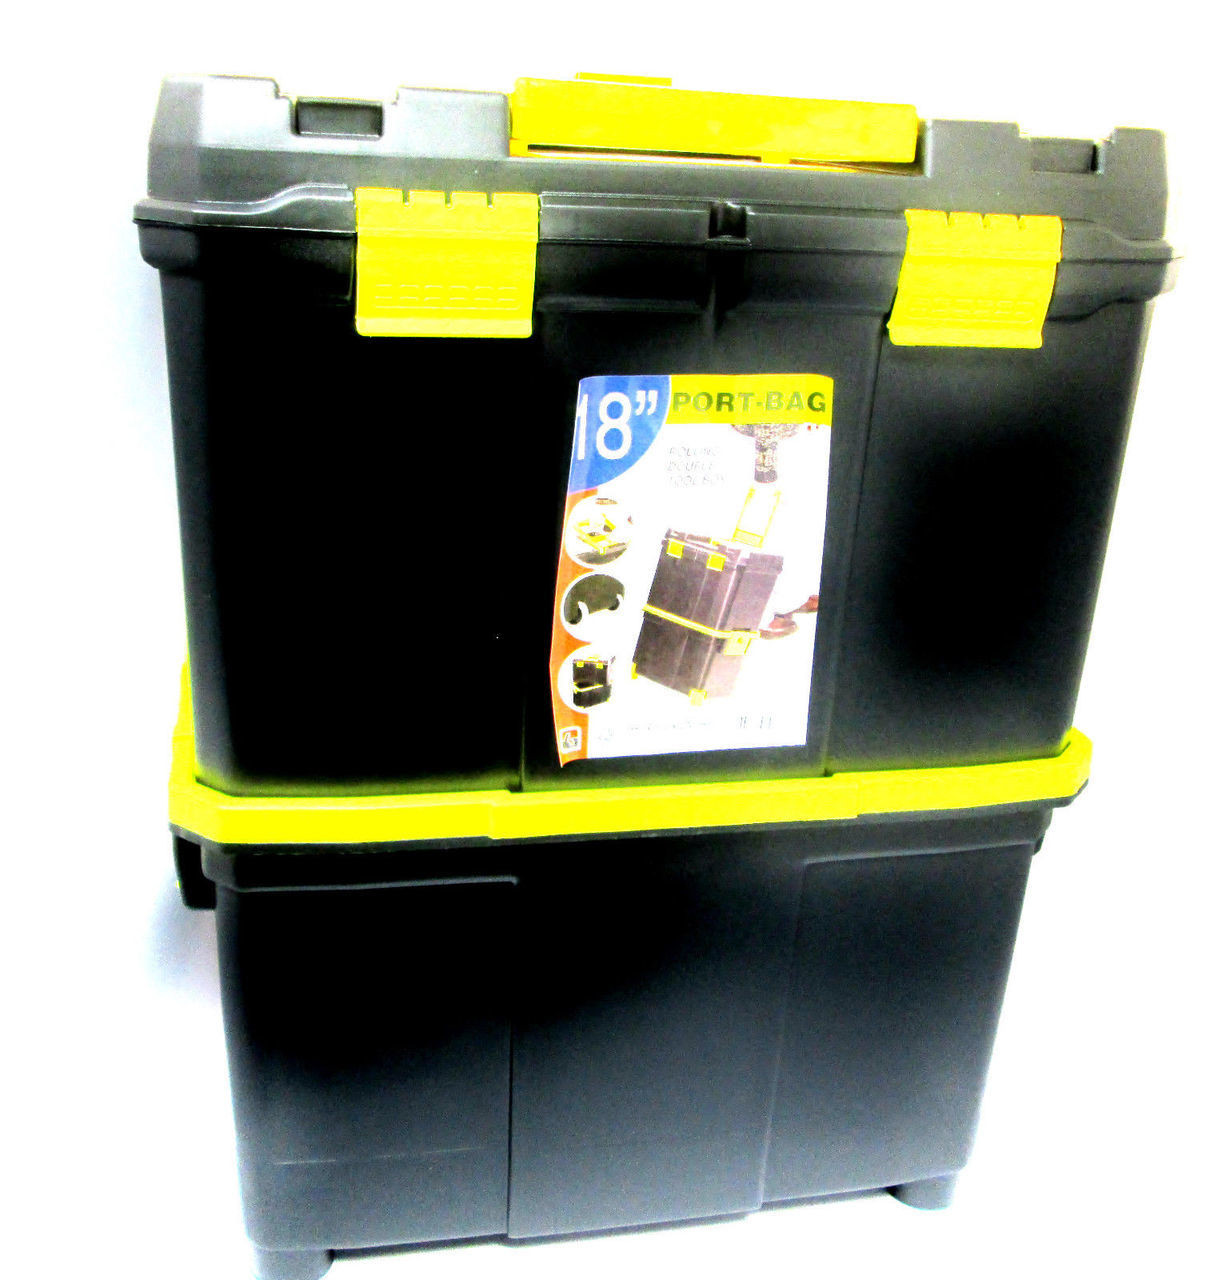 18" Mobile Organiser / Double Toolbox With Inner Tray TZ TB088 New